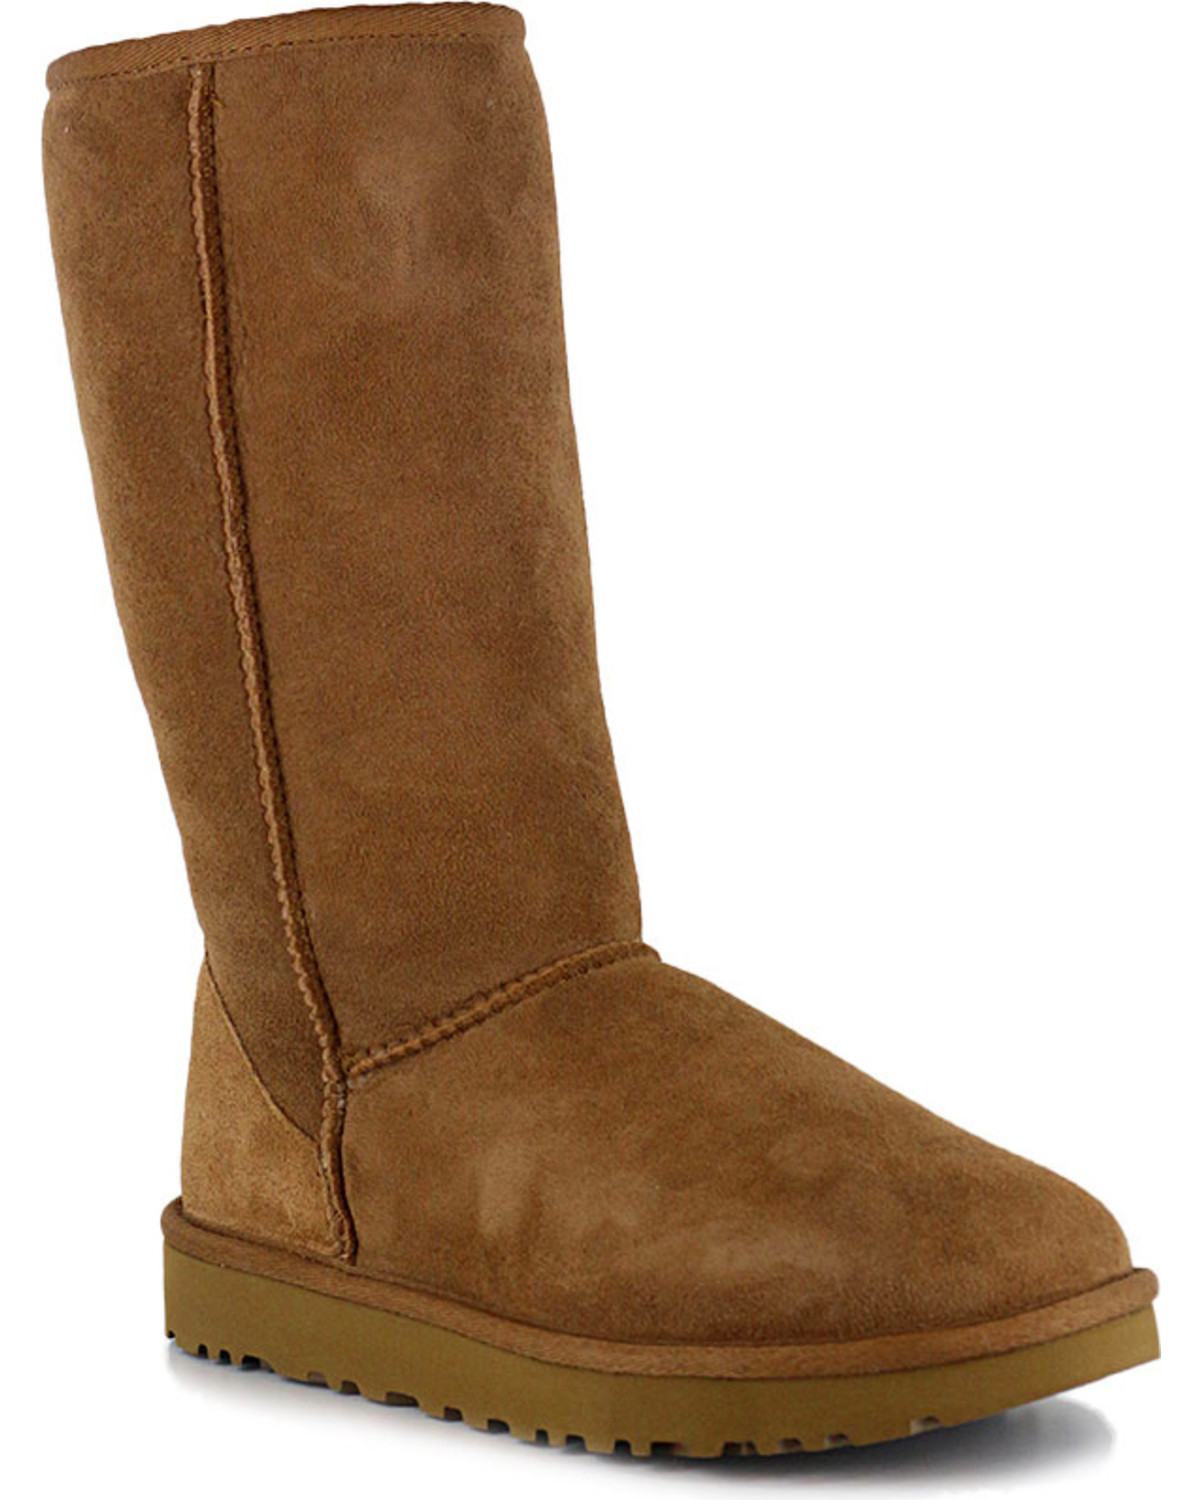 ladies tall ugg boots